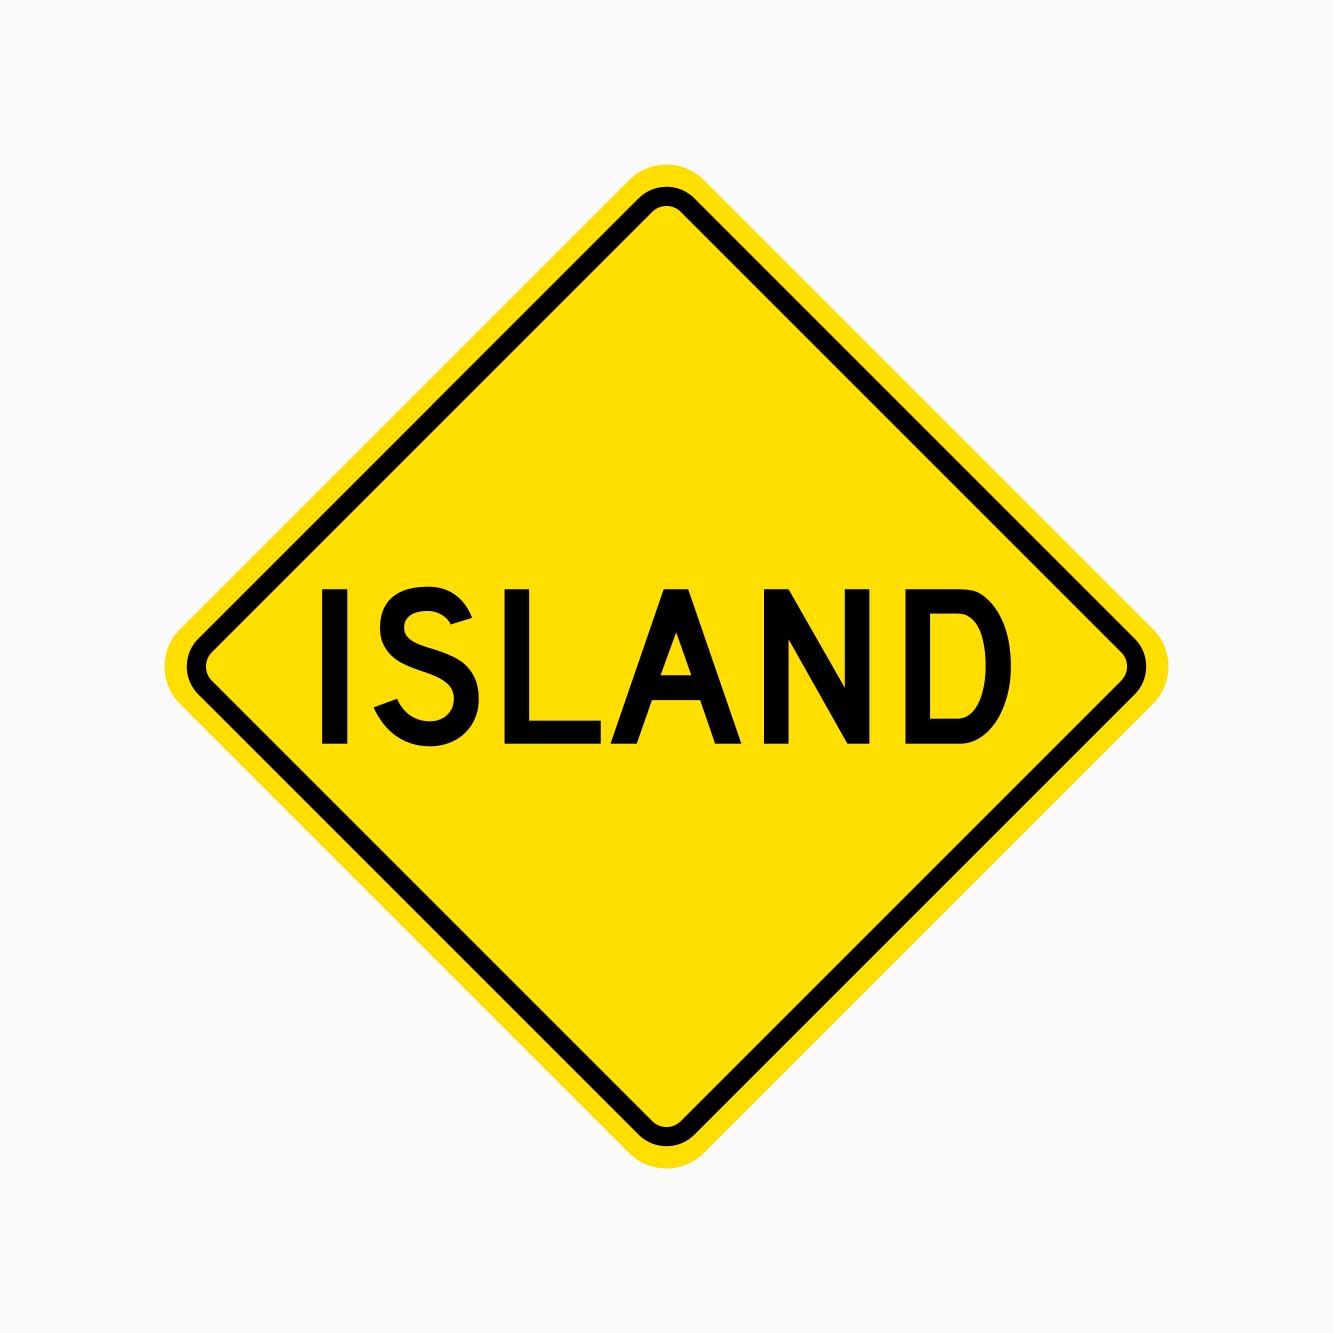 ISLAND SIGN W4-5 - GET SIGNS Supply Road and Safety Signs in Australia